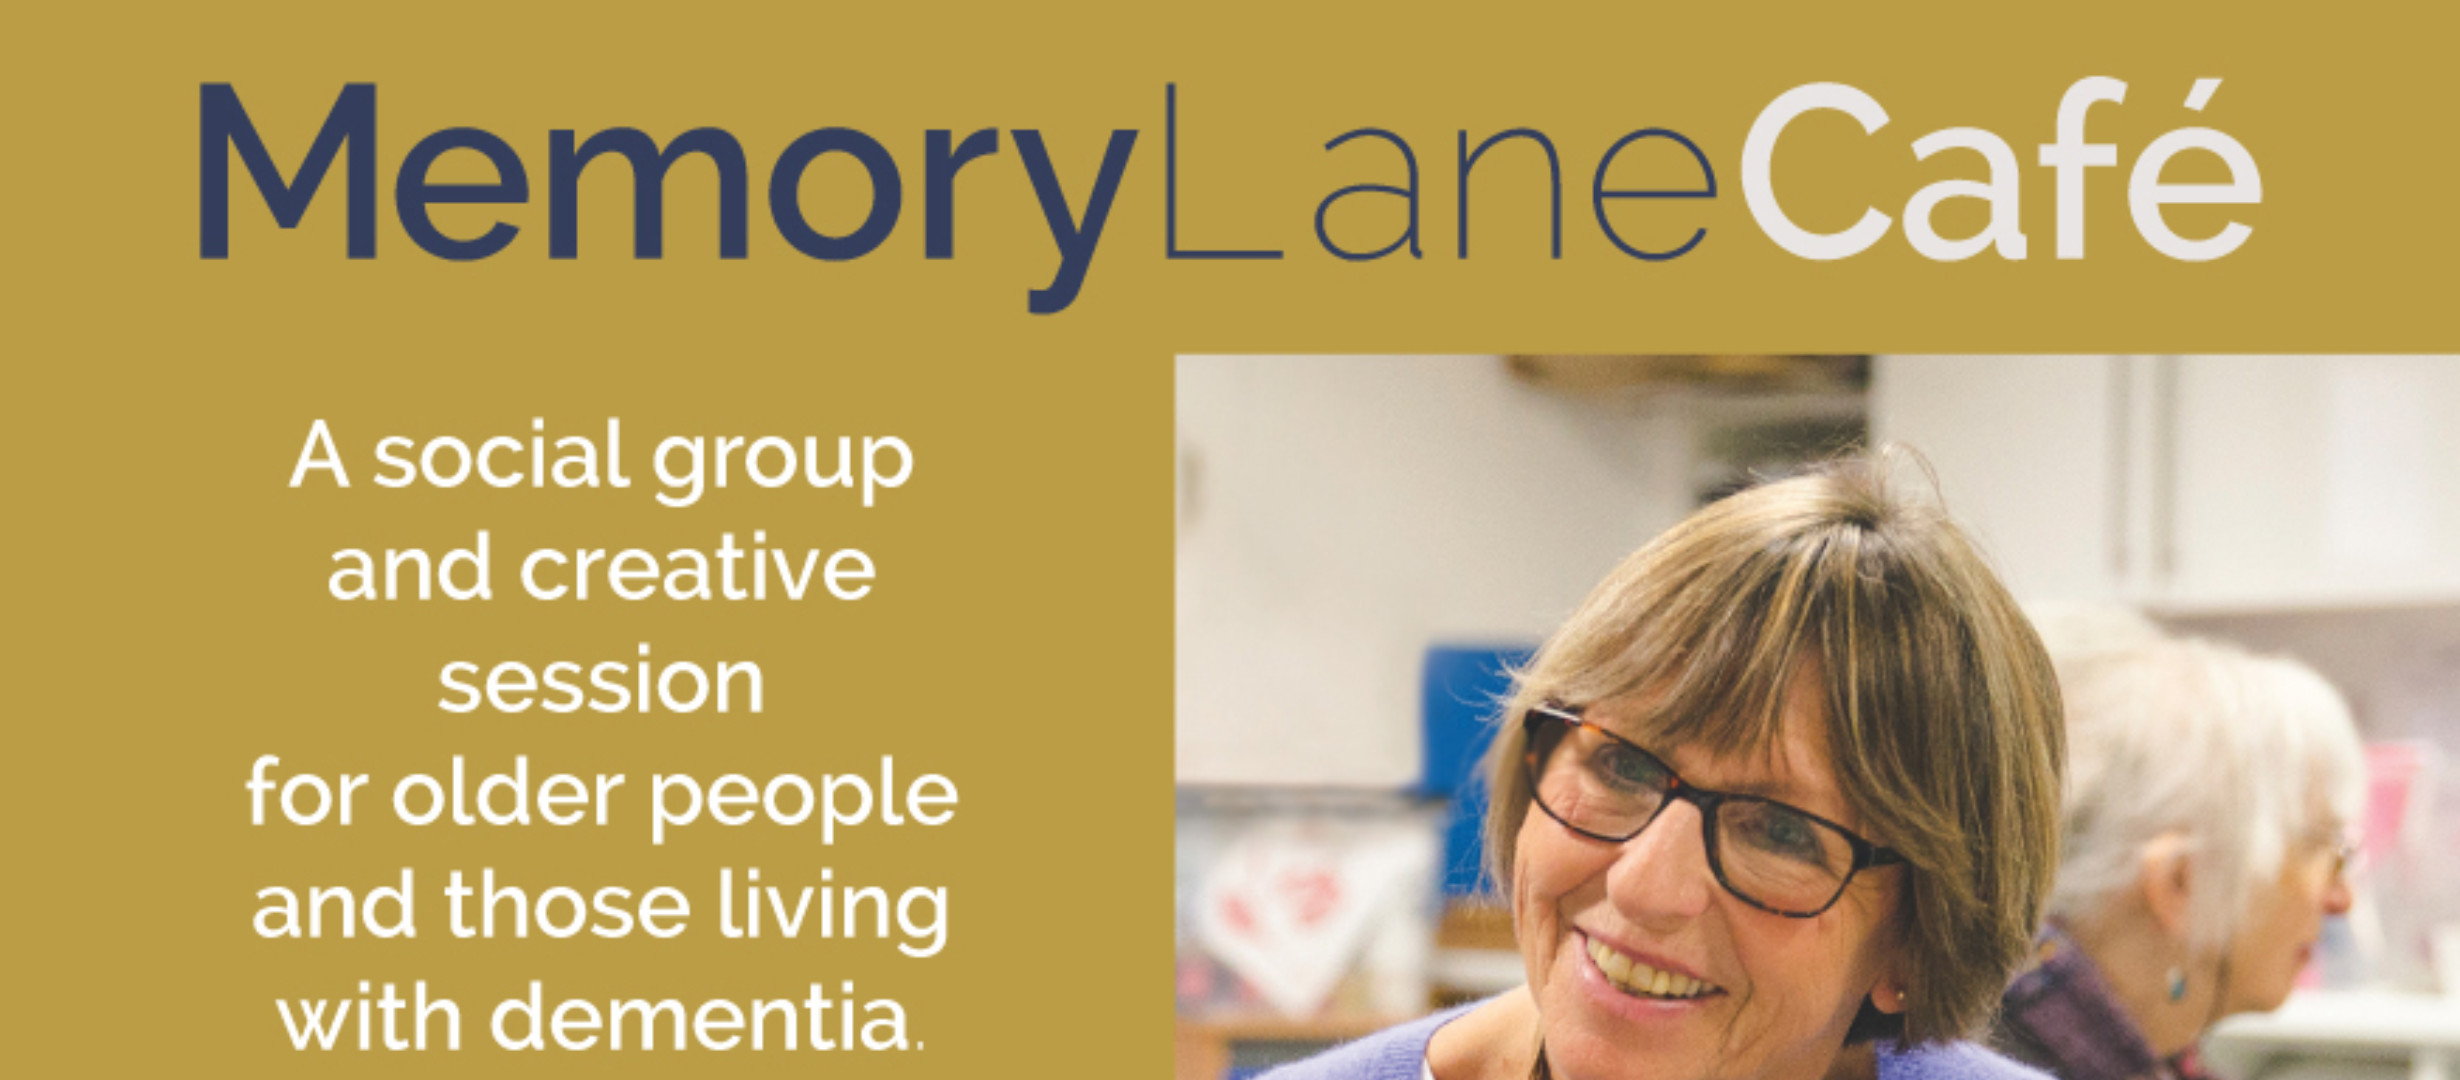 Memory Lane Café - creative session for older people and those living with dementia